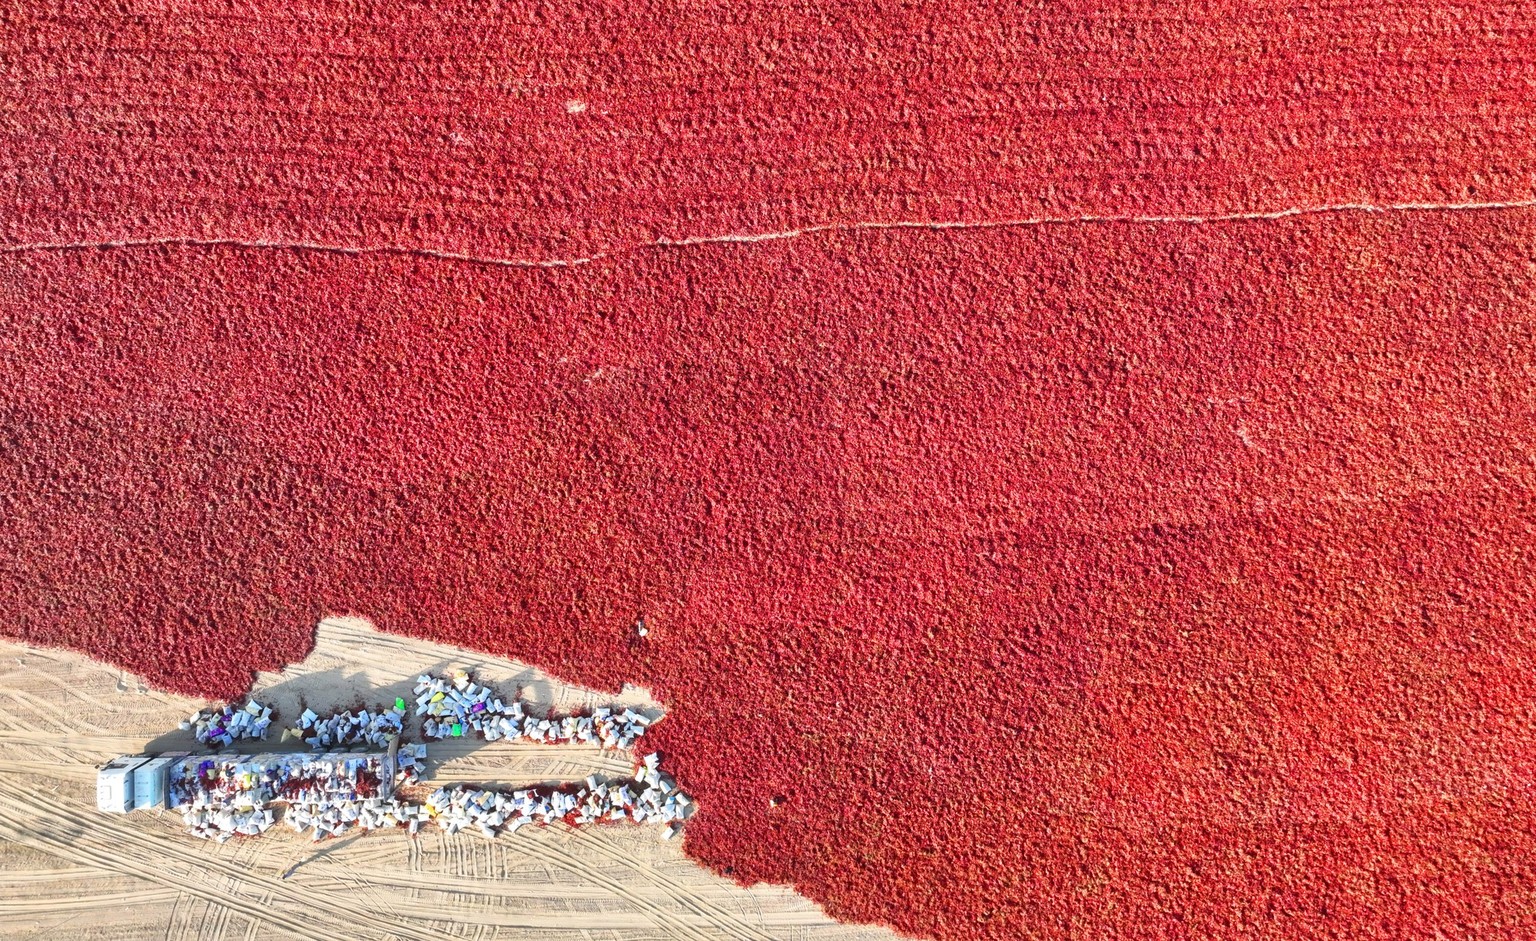 BAYINGOLIN, CHINA - SEPTEMBER 19: Aerial view of red chili peppers aired on fields on September 19, 2023 in Heshuo County, Bayingolin Mongol Autonomous Prefecture, Xinjiang Uygur Autonomous Region of  ...